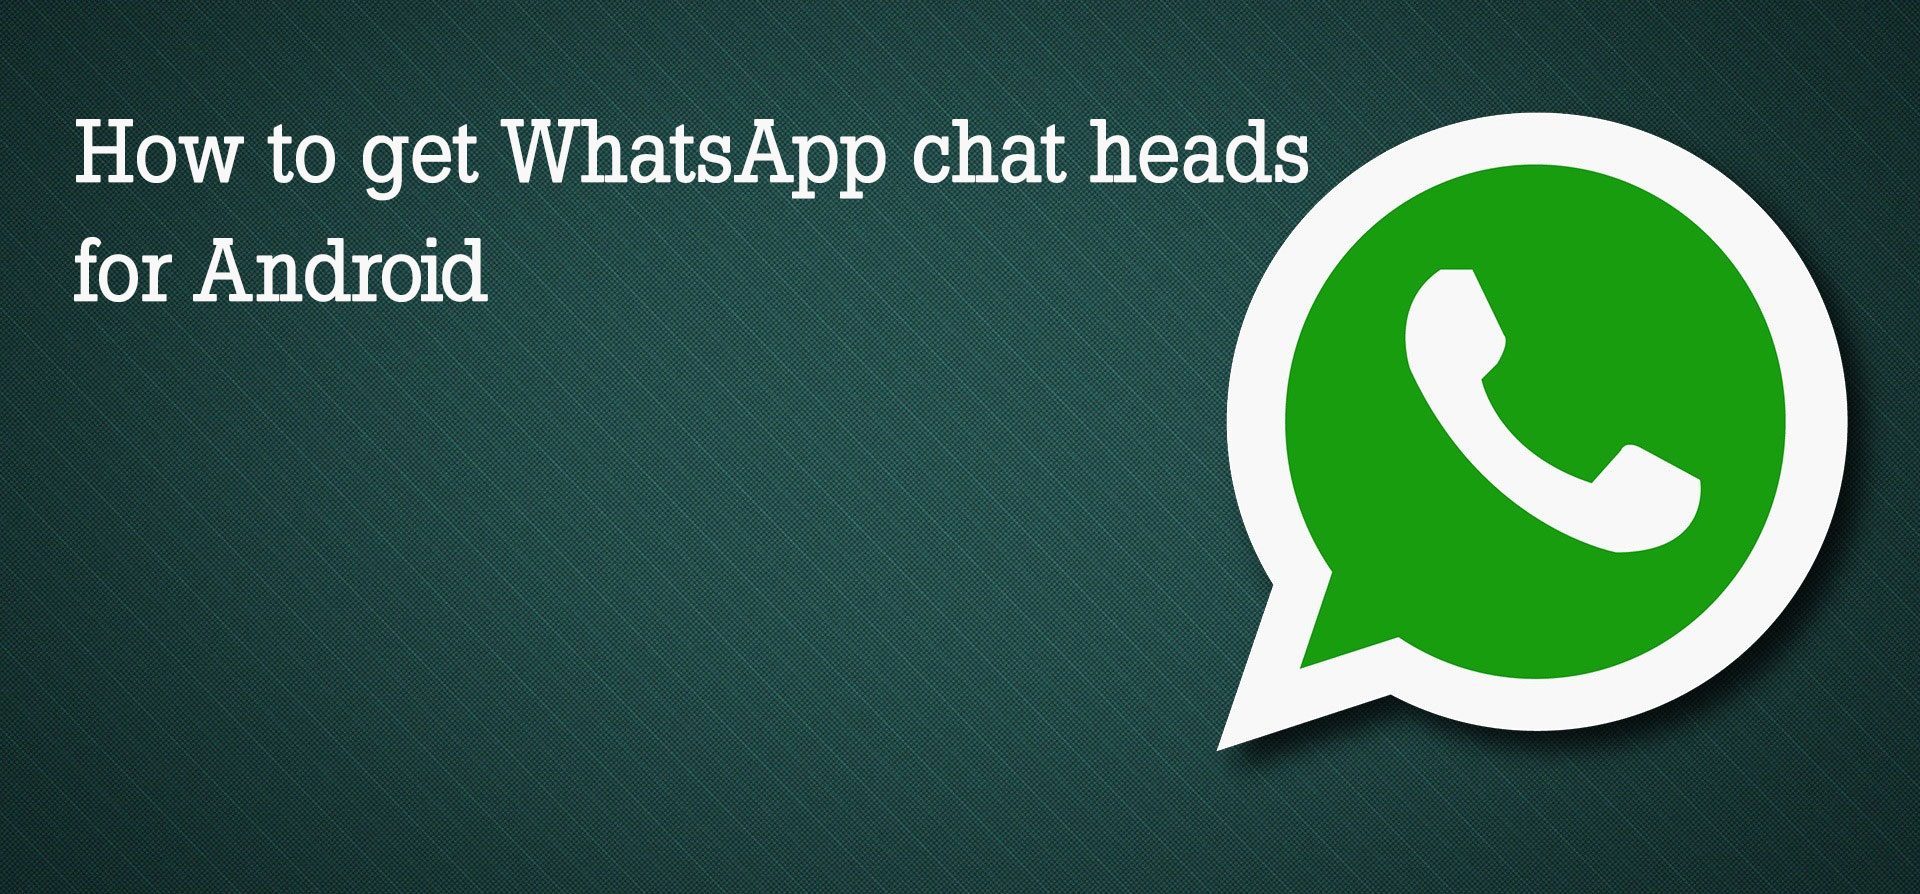 How To Get Whatsapp Chat Heads For Android